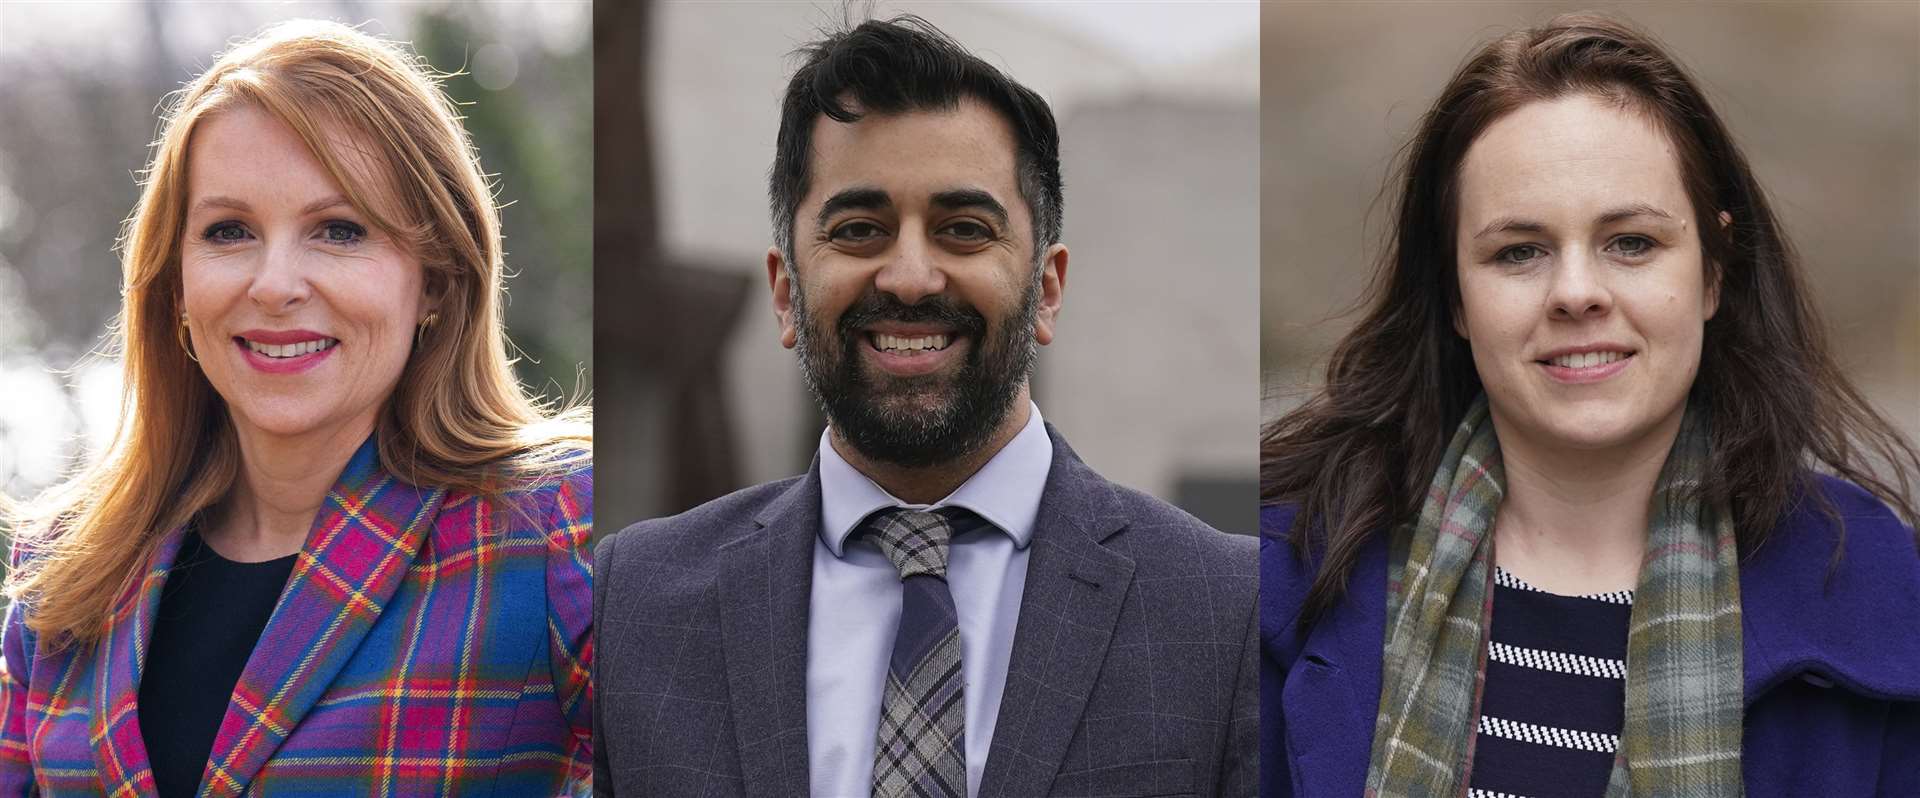 Three candidates are running to replace Nicola Sturgeon as SNP leader as First Minister – Ash Regan, Humza Yousaf and Kate Forbes (Jane Barlow/Andrew Milligan/PA)